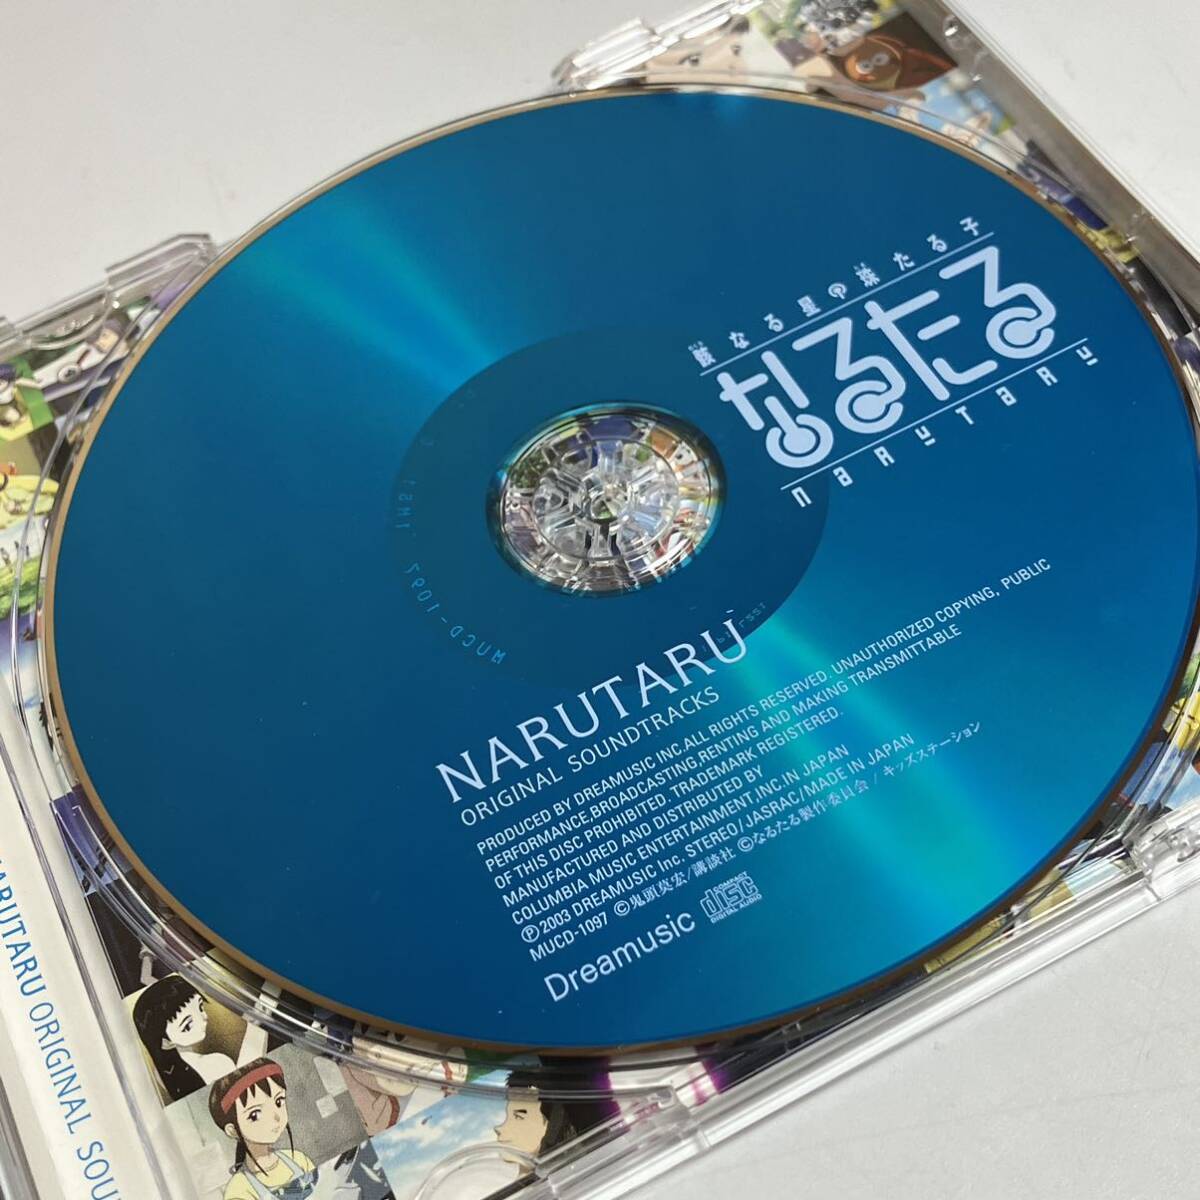  rare!! anime CD. become star .... become .. original soundtrack MUCD-1097 ultra rare popular records out of production out of print do Lee music 